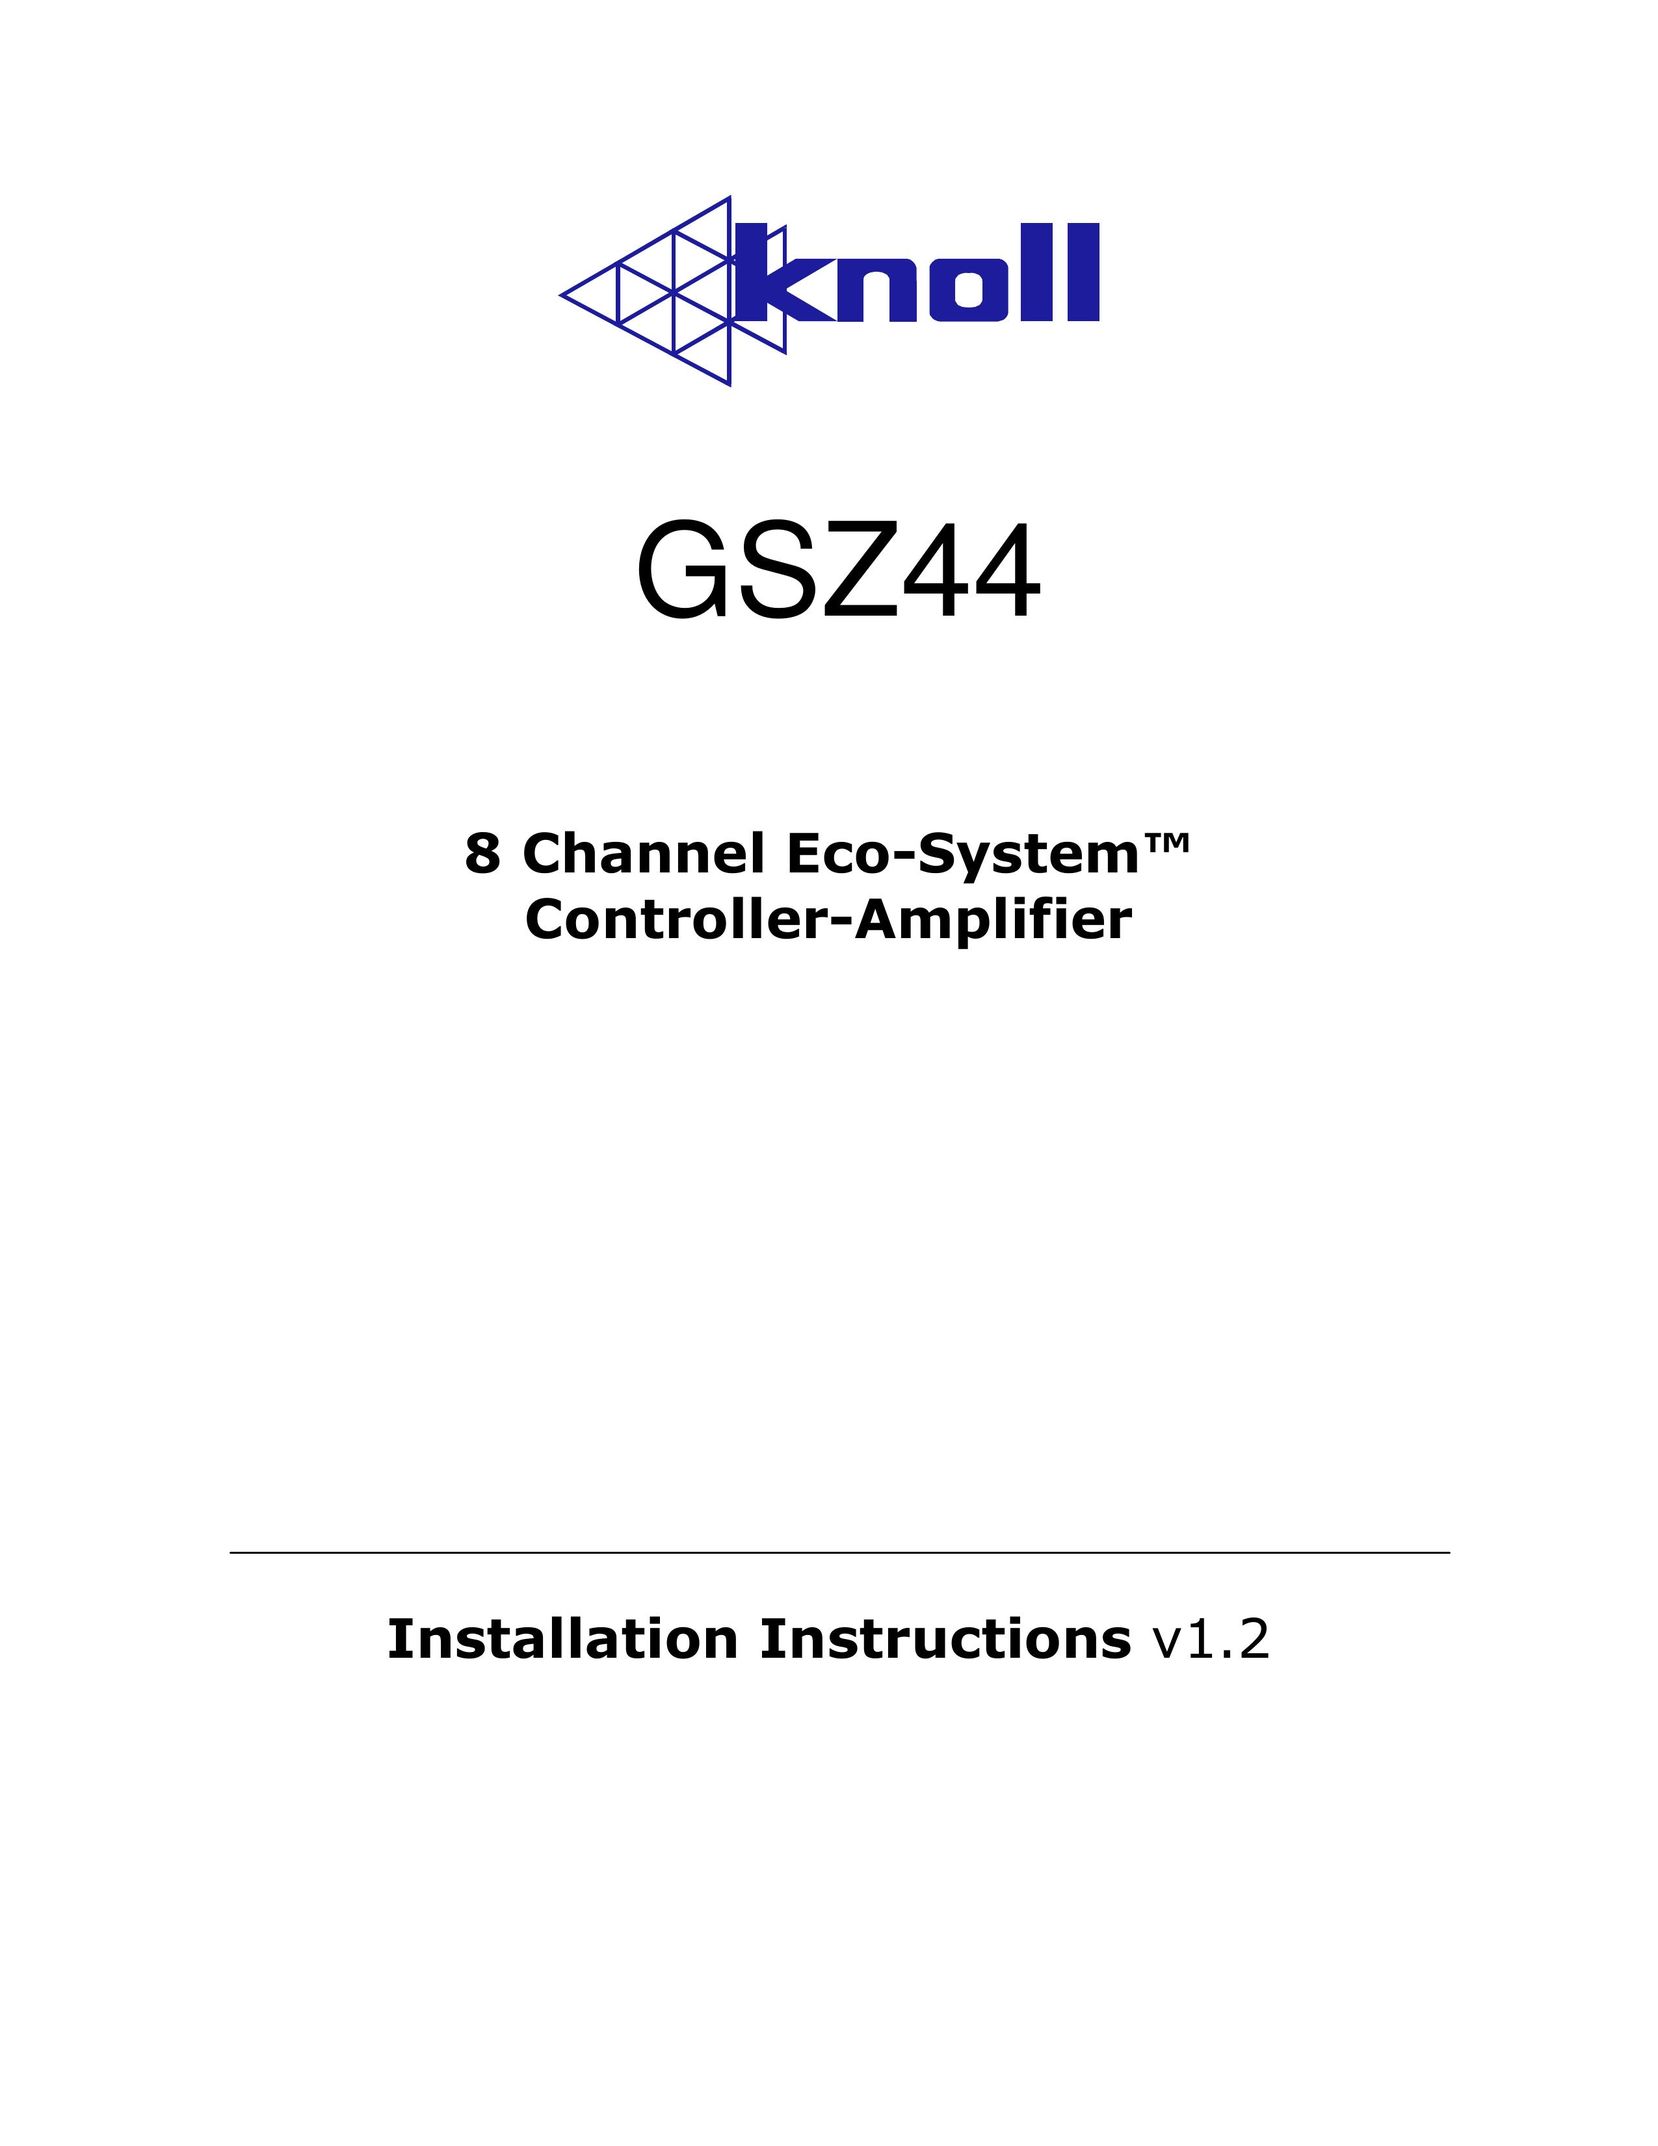 Knoll Systems GSZ44 Stereo Amplifier User Manual